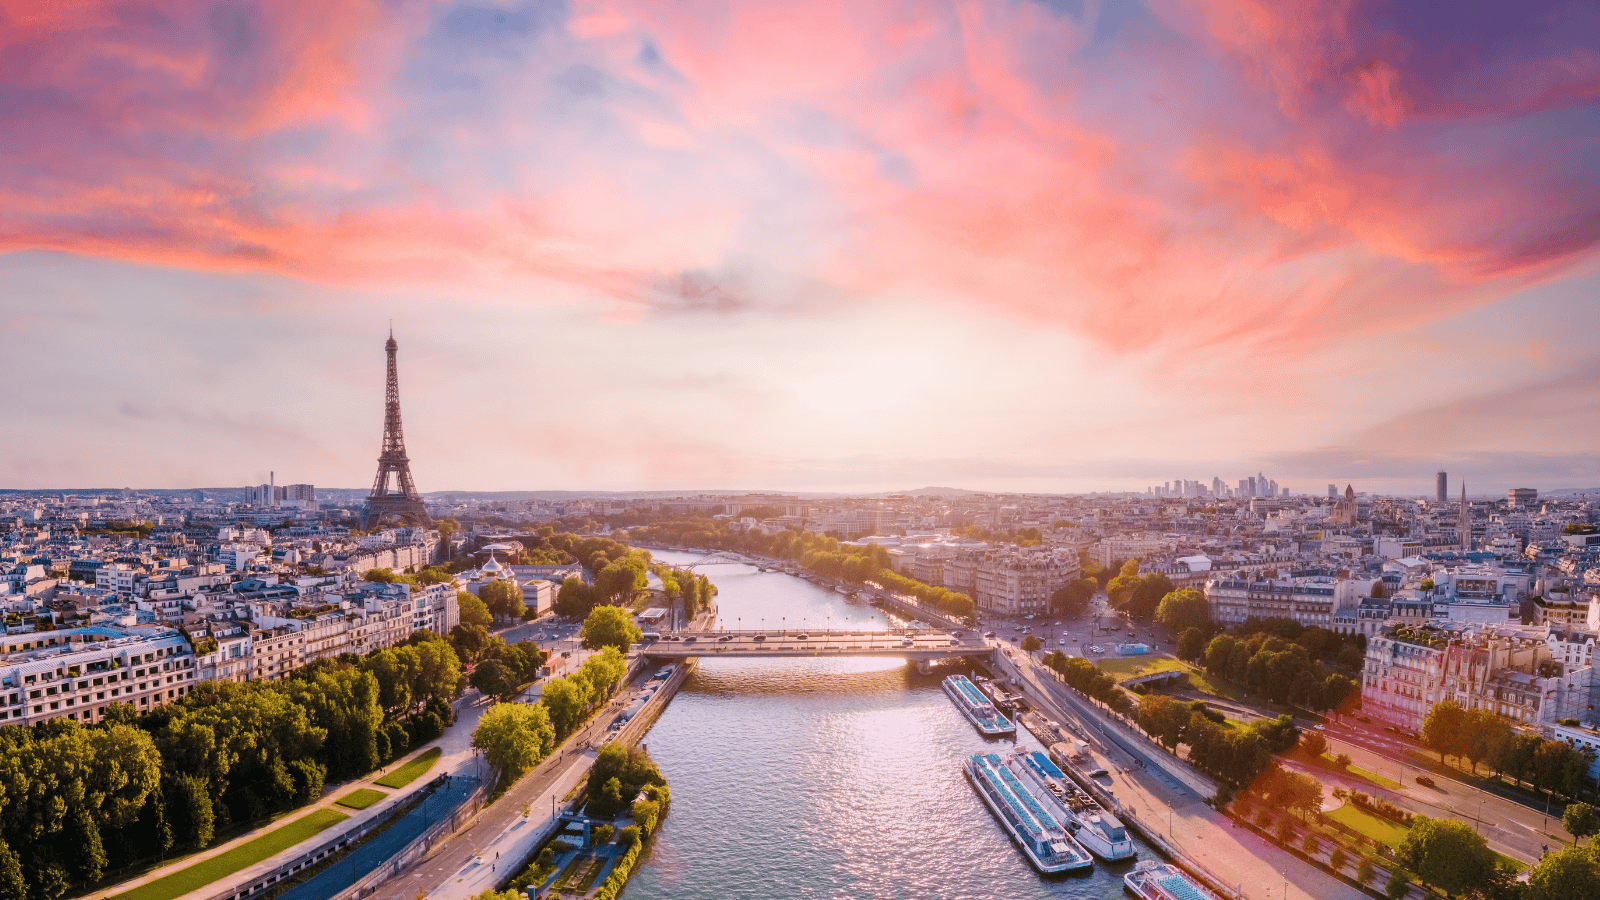 <p>The City of Love welcomes visitors of all abilities. <a href="https://whatthefab.com/the-ultimate-paris-travel-guide.html" rel="follow">Paris</a> is a famous tourist spot and provides ample sightseeing opportunities, regardless of your mobility level.</p><p>The Louvre, Versailles, and Musee d’Orsay are can’t-miss places that disabled visitors can easily explore. Though the metro isn’t accessible, trains and buses make traveling throughout Paris with a wheelchair or scooter easy.</p>